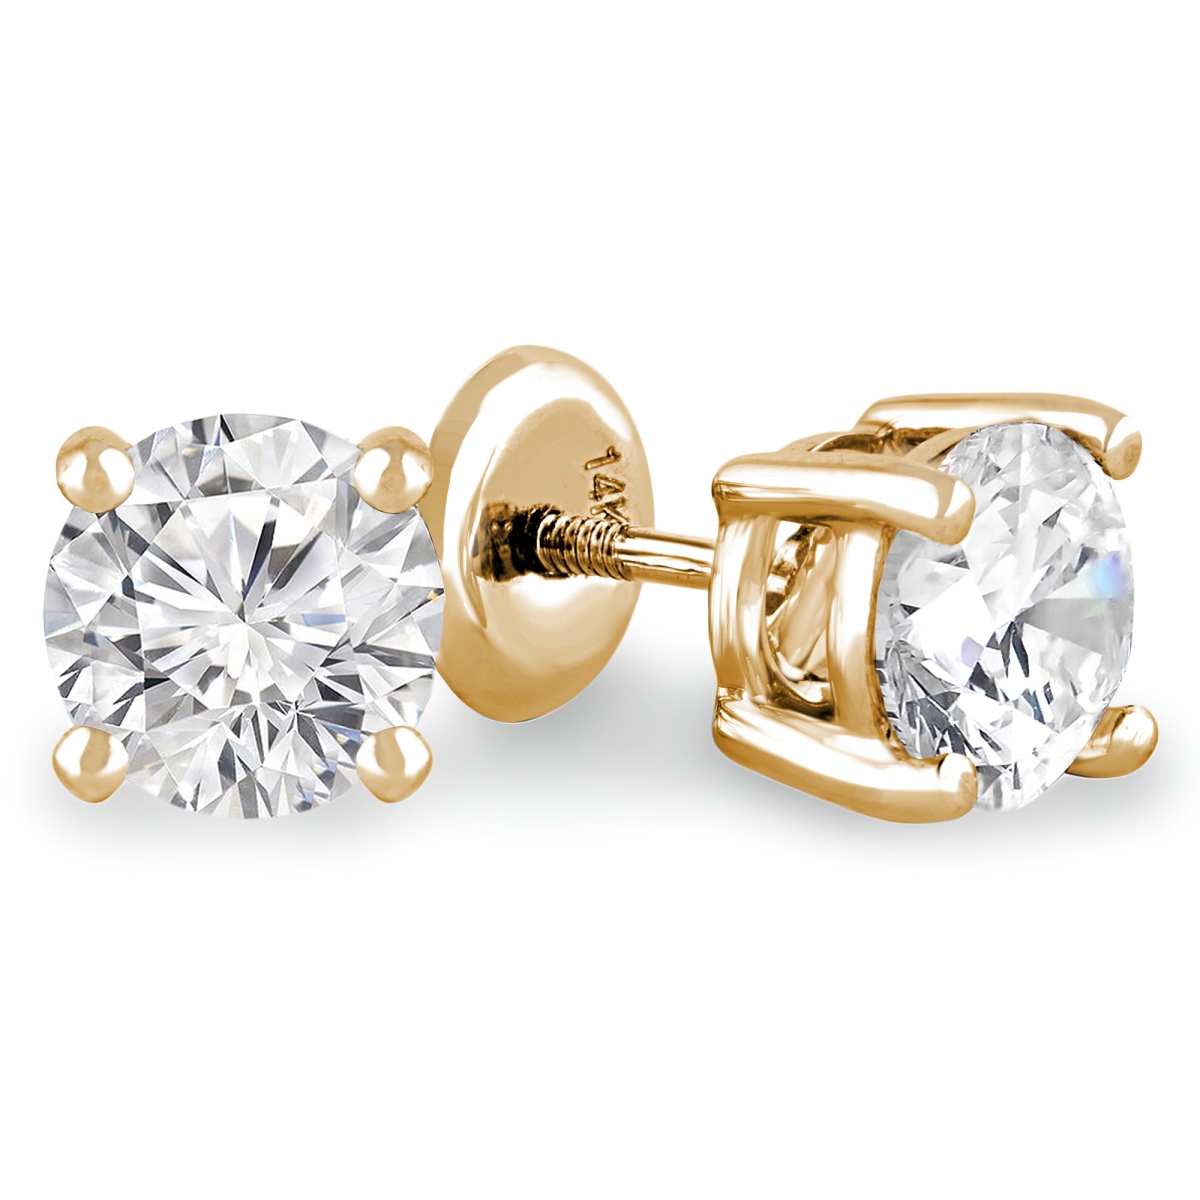 Picture of Majesty Diamonds MD240307 0.75 CTW Round Diamond 4-Prong Stud Earrings in 14K Yellow Gold